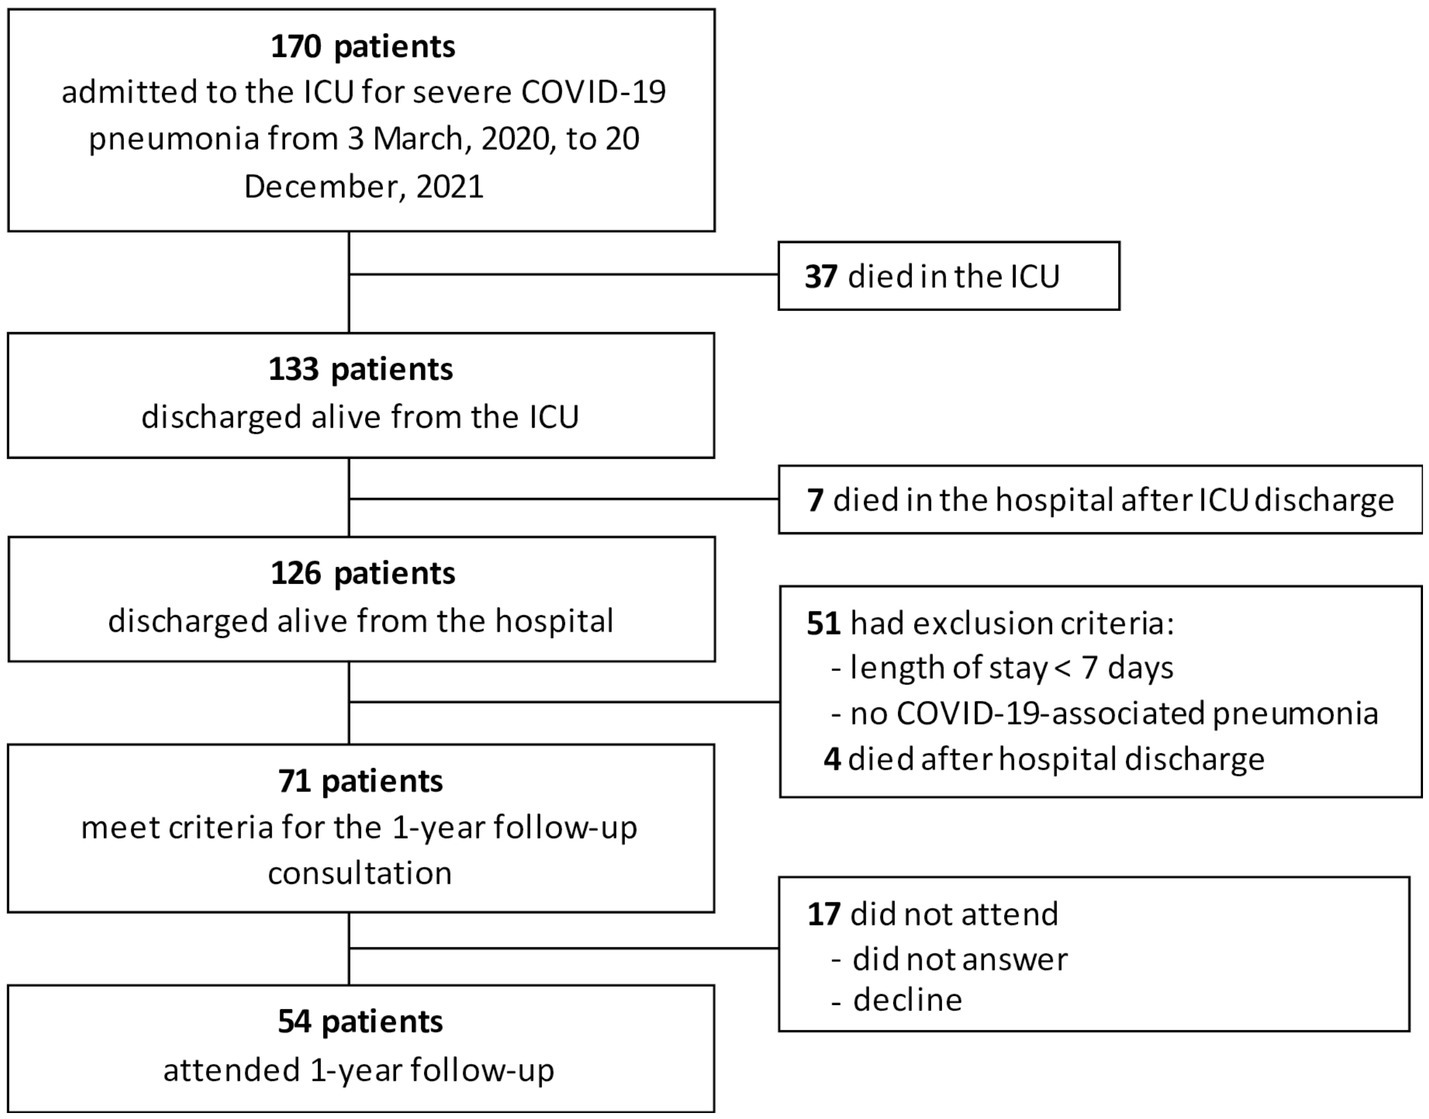 Death in hospital following ICU discharge: insights from the LUNG SAFE  study, Critical Care